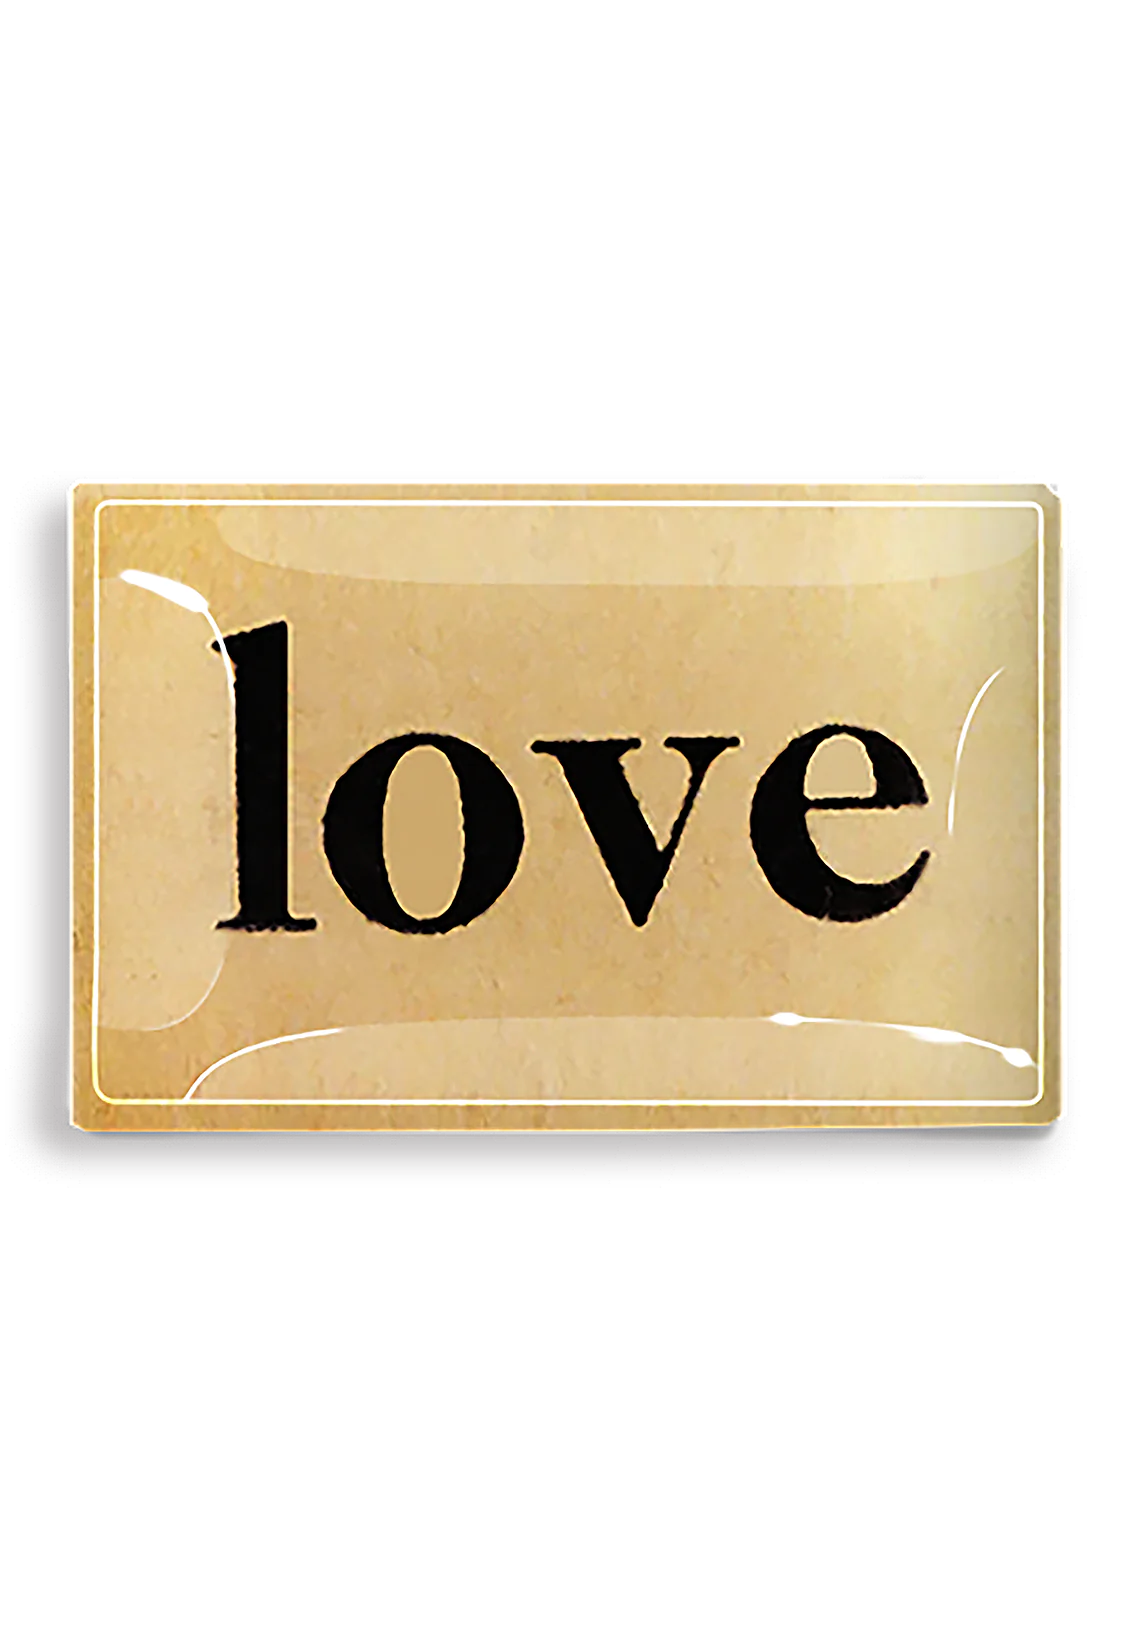 A vintage-style Tray 5.5" x 8.5" golden keychain with the word "love" written in black cursive letters on a cream background, enclosed in a glossy rectangular frame, perfect for a Scottsdale Arizona souvenir. (Ben's Garden)